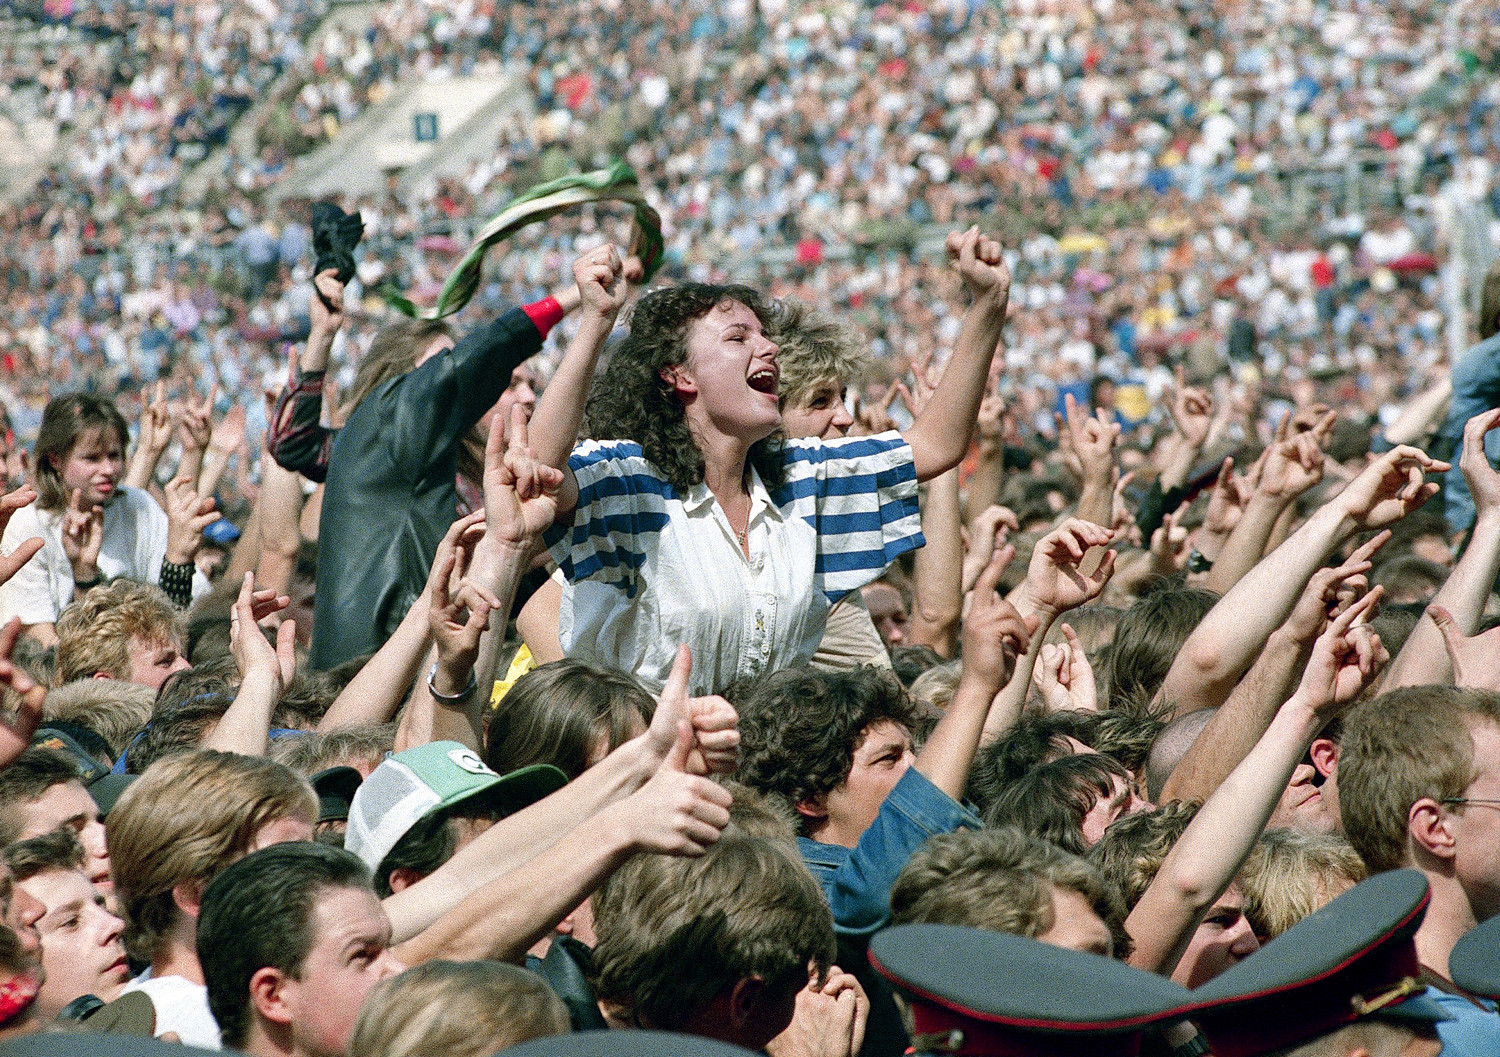 Western heavy metal rock bands including Bon Jovi, and Cinderella were enthusiastically received by loving fans in Moscow on Saturday, August 12, 1989 